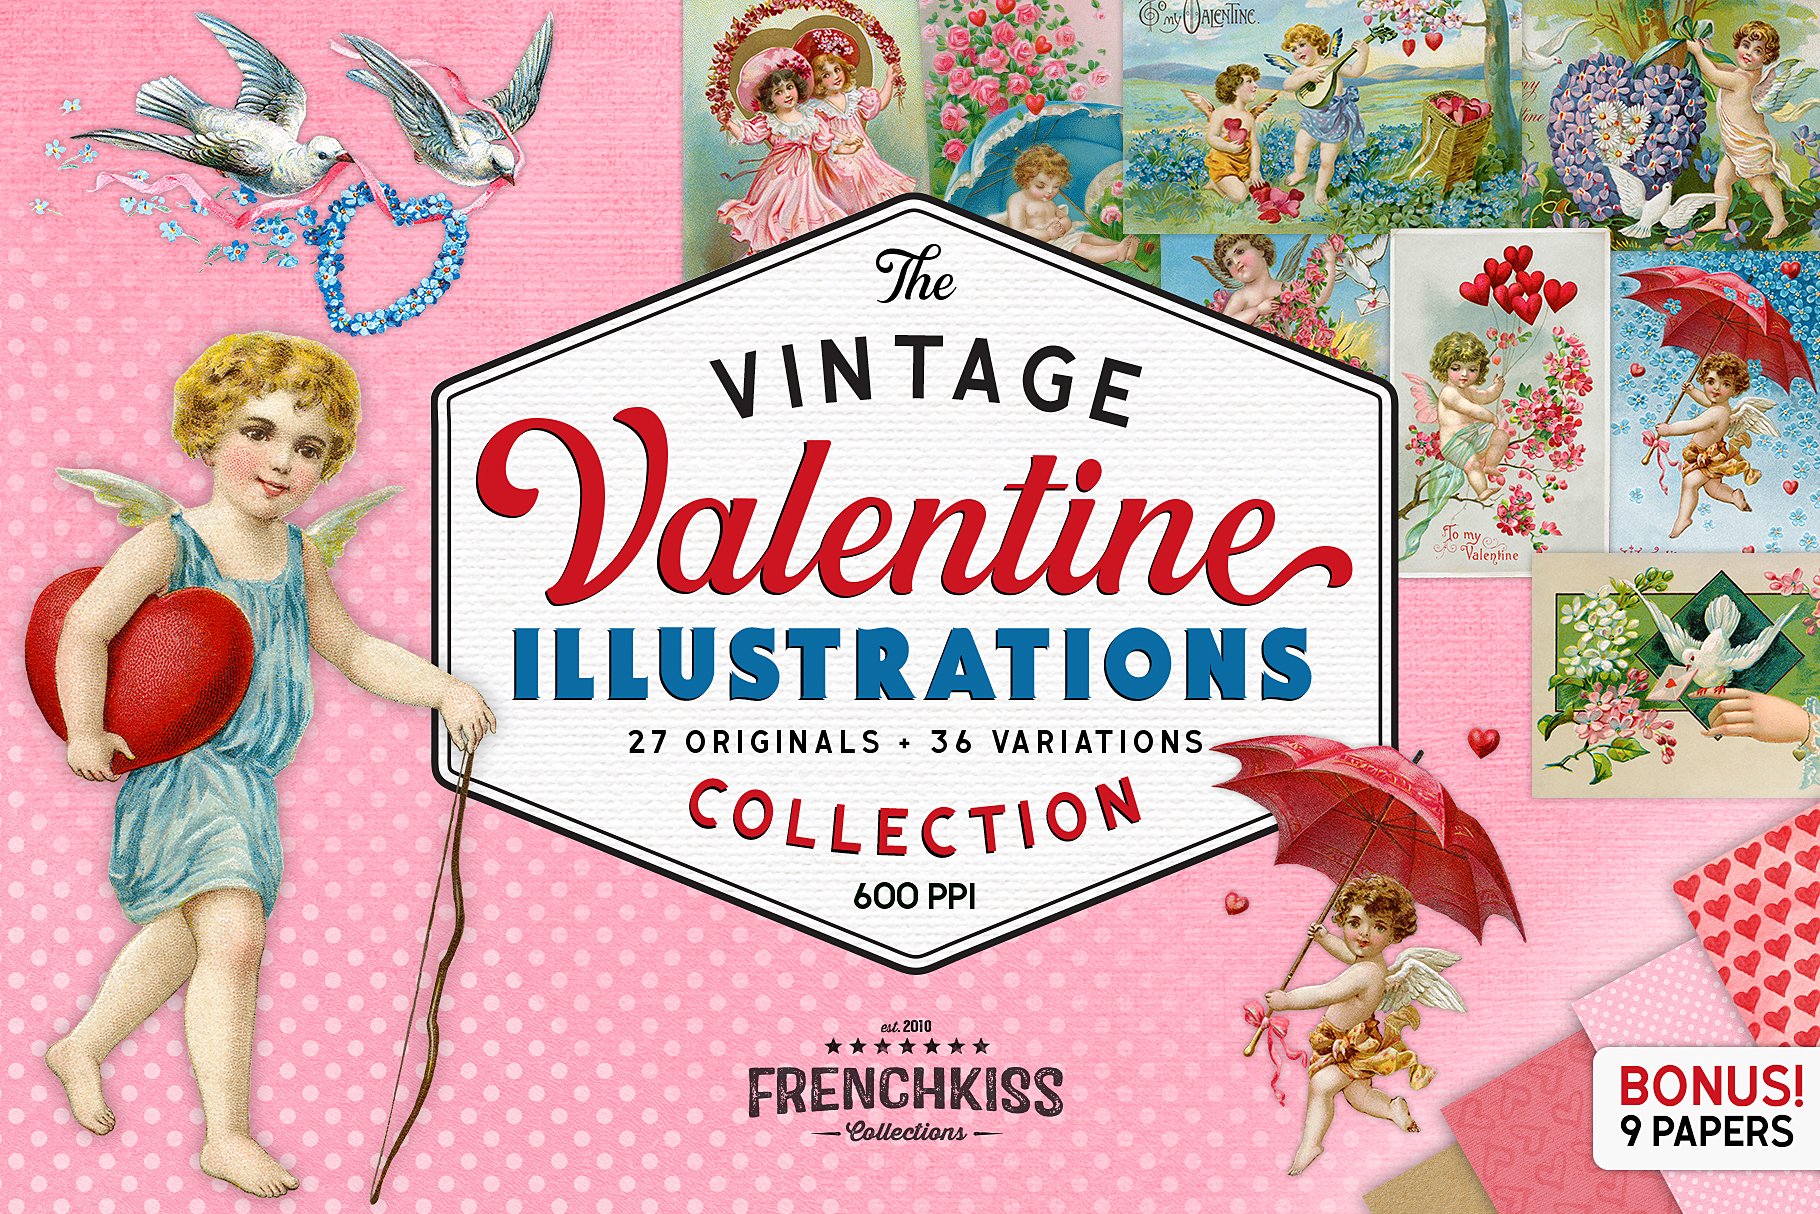 Vintage Valentine's cards are popular with collectors, Vintage